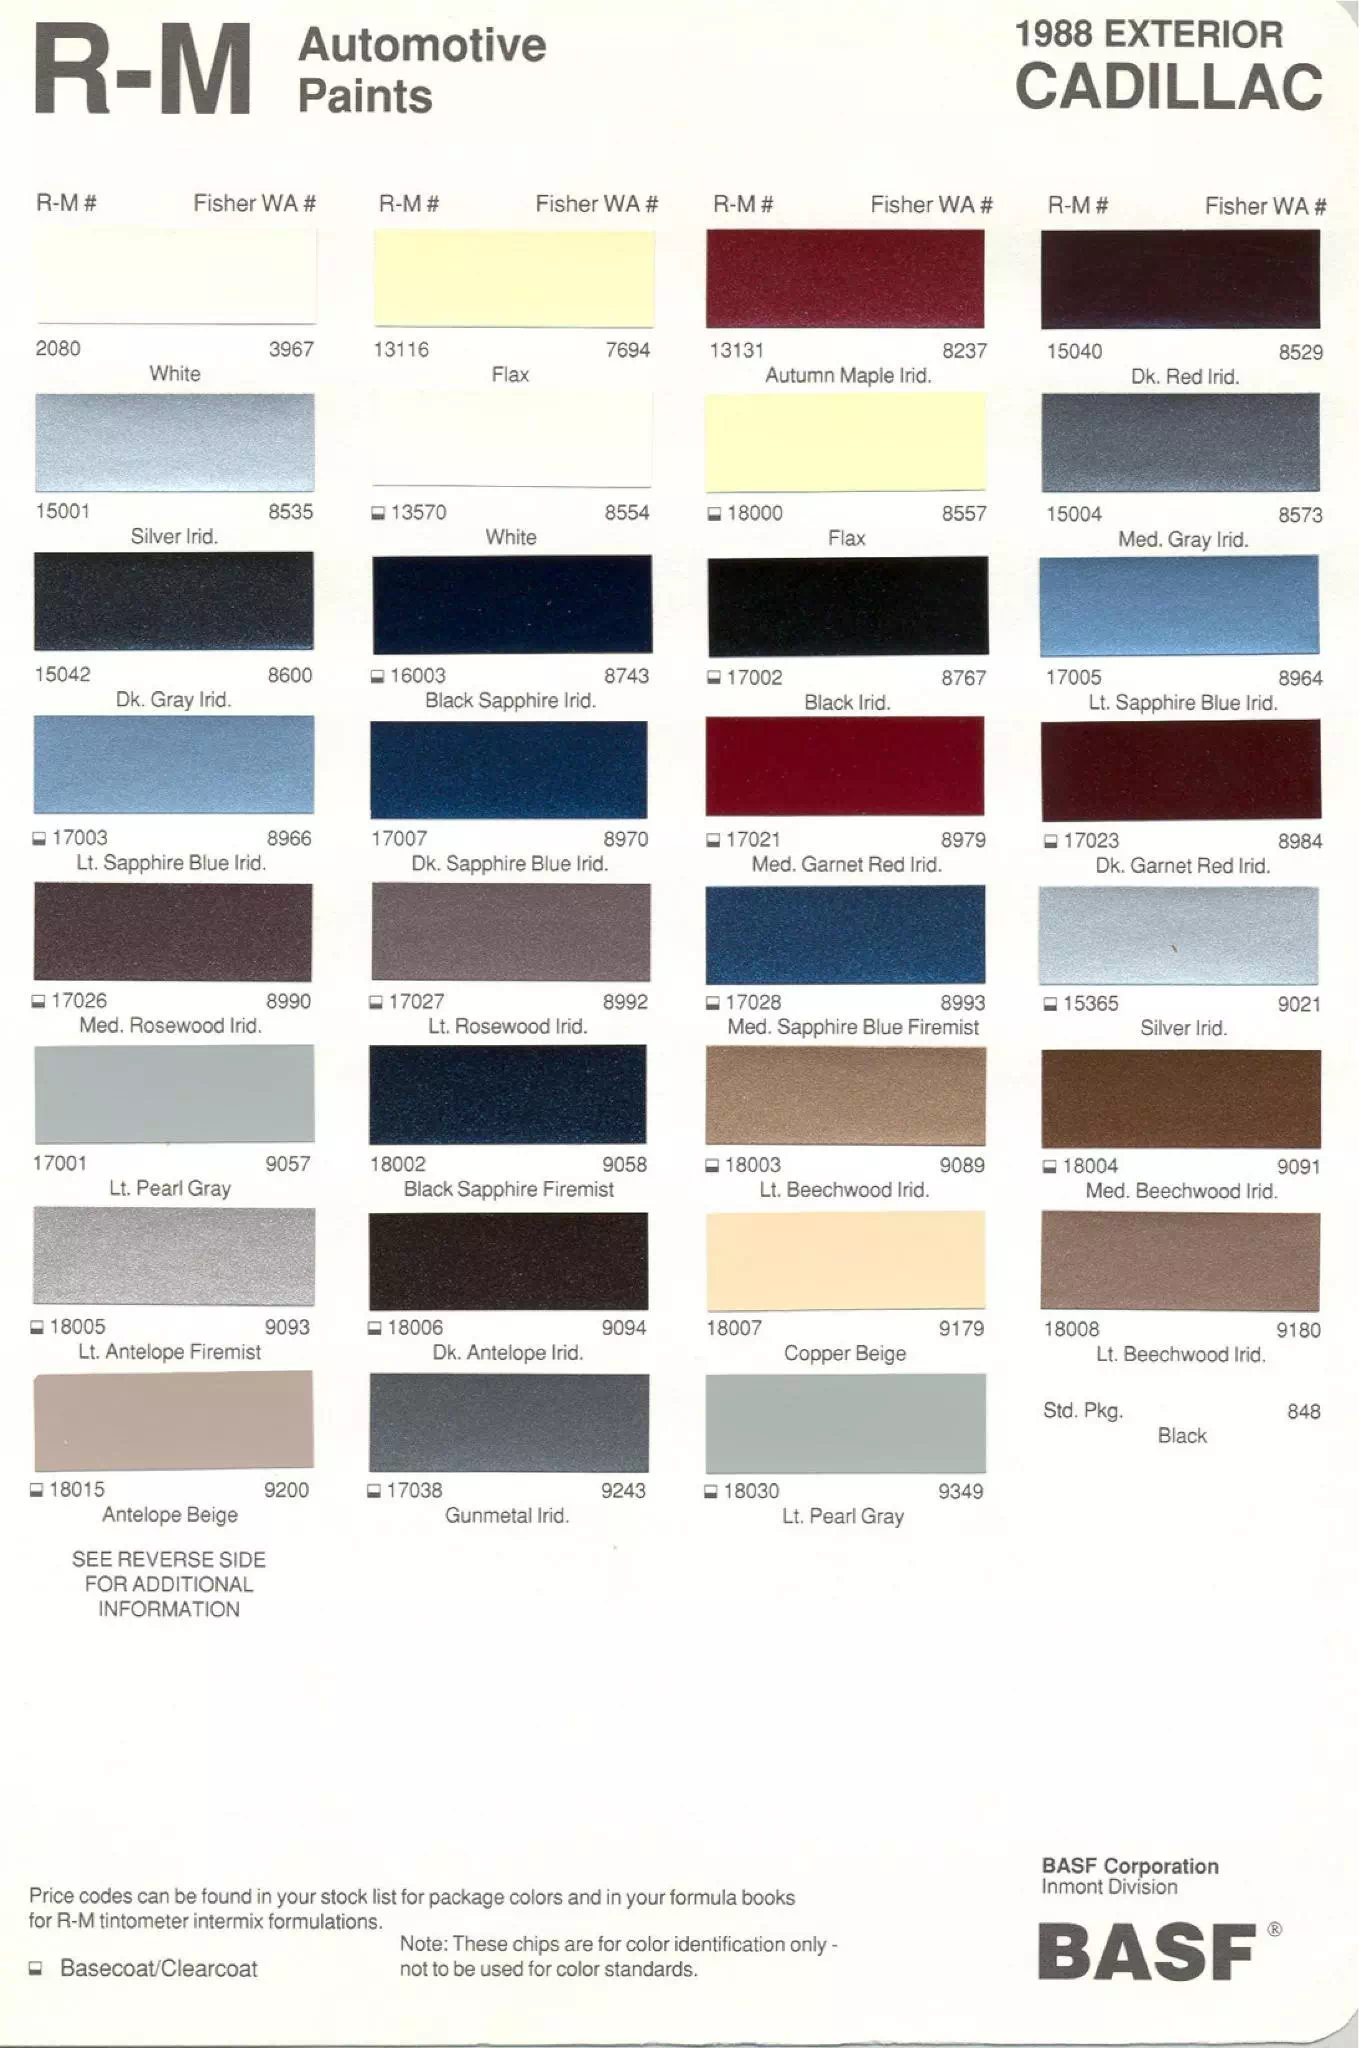 General Motors oem paint swatches, color codes and color names for 1988 vehicles.